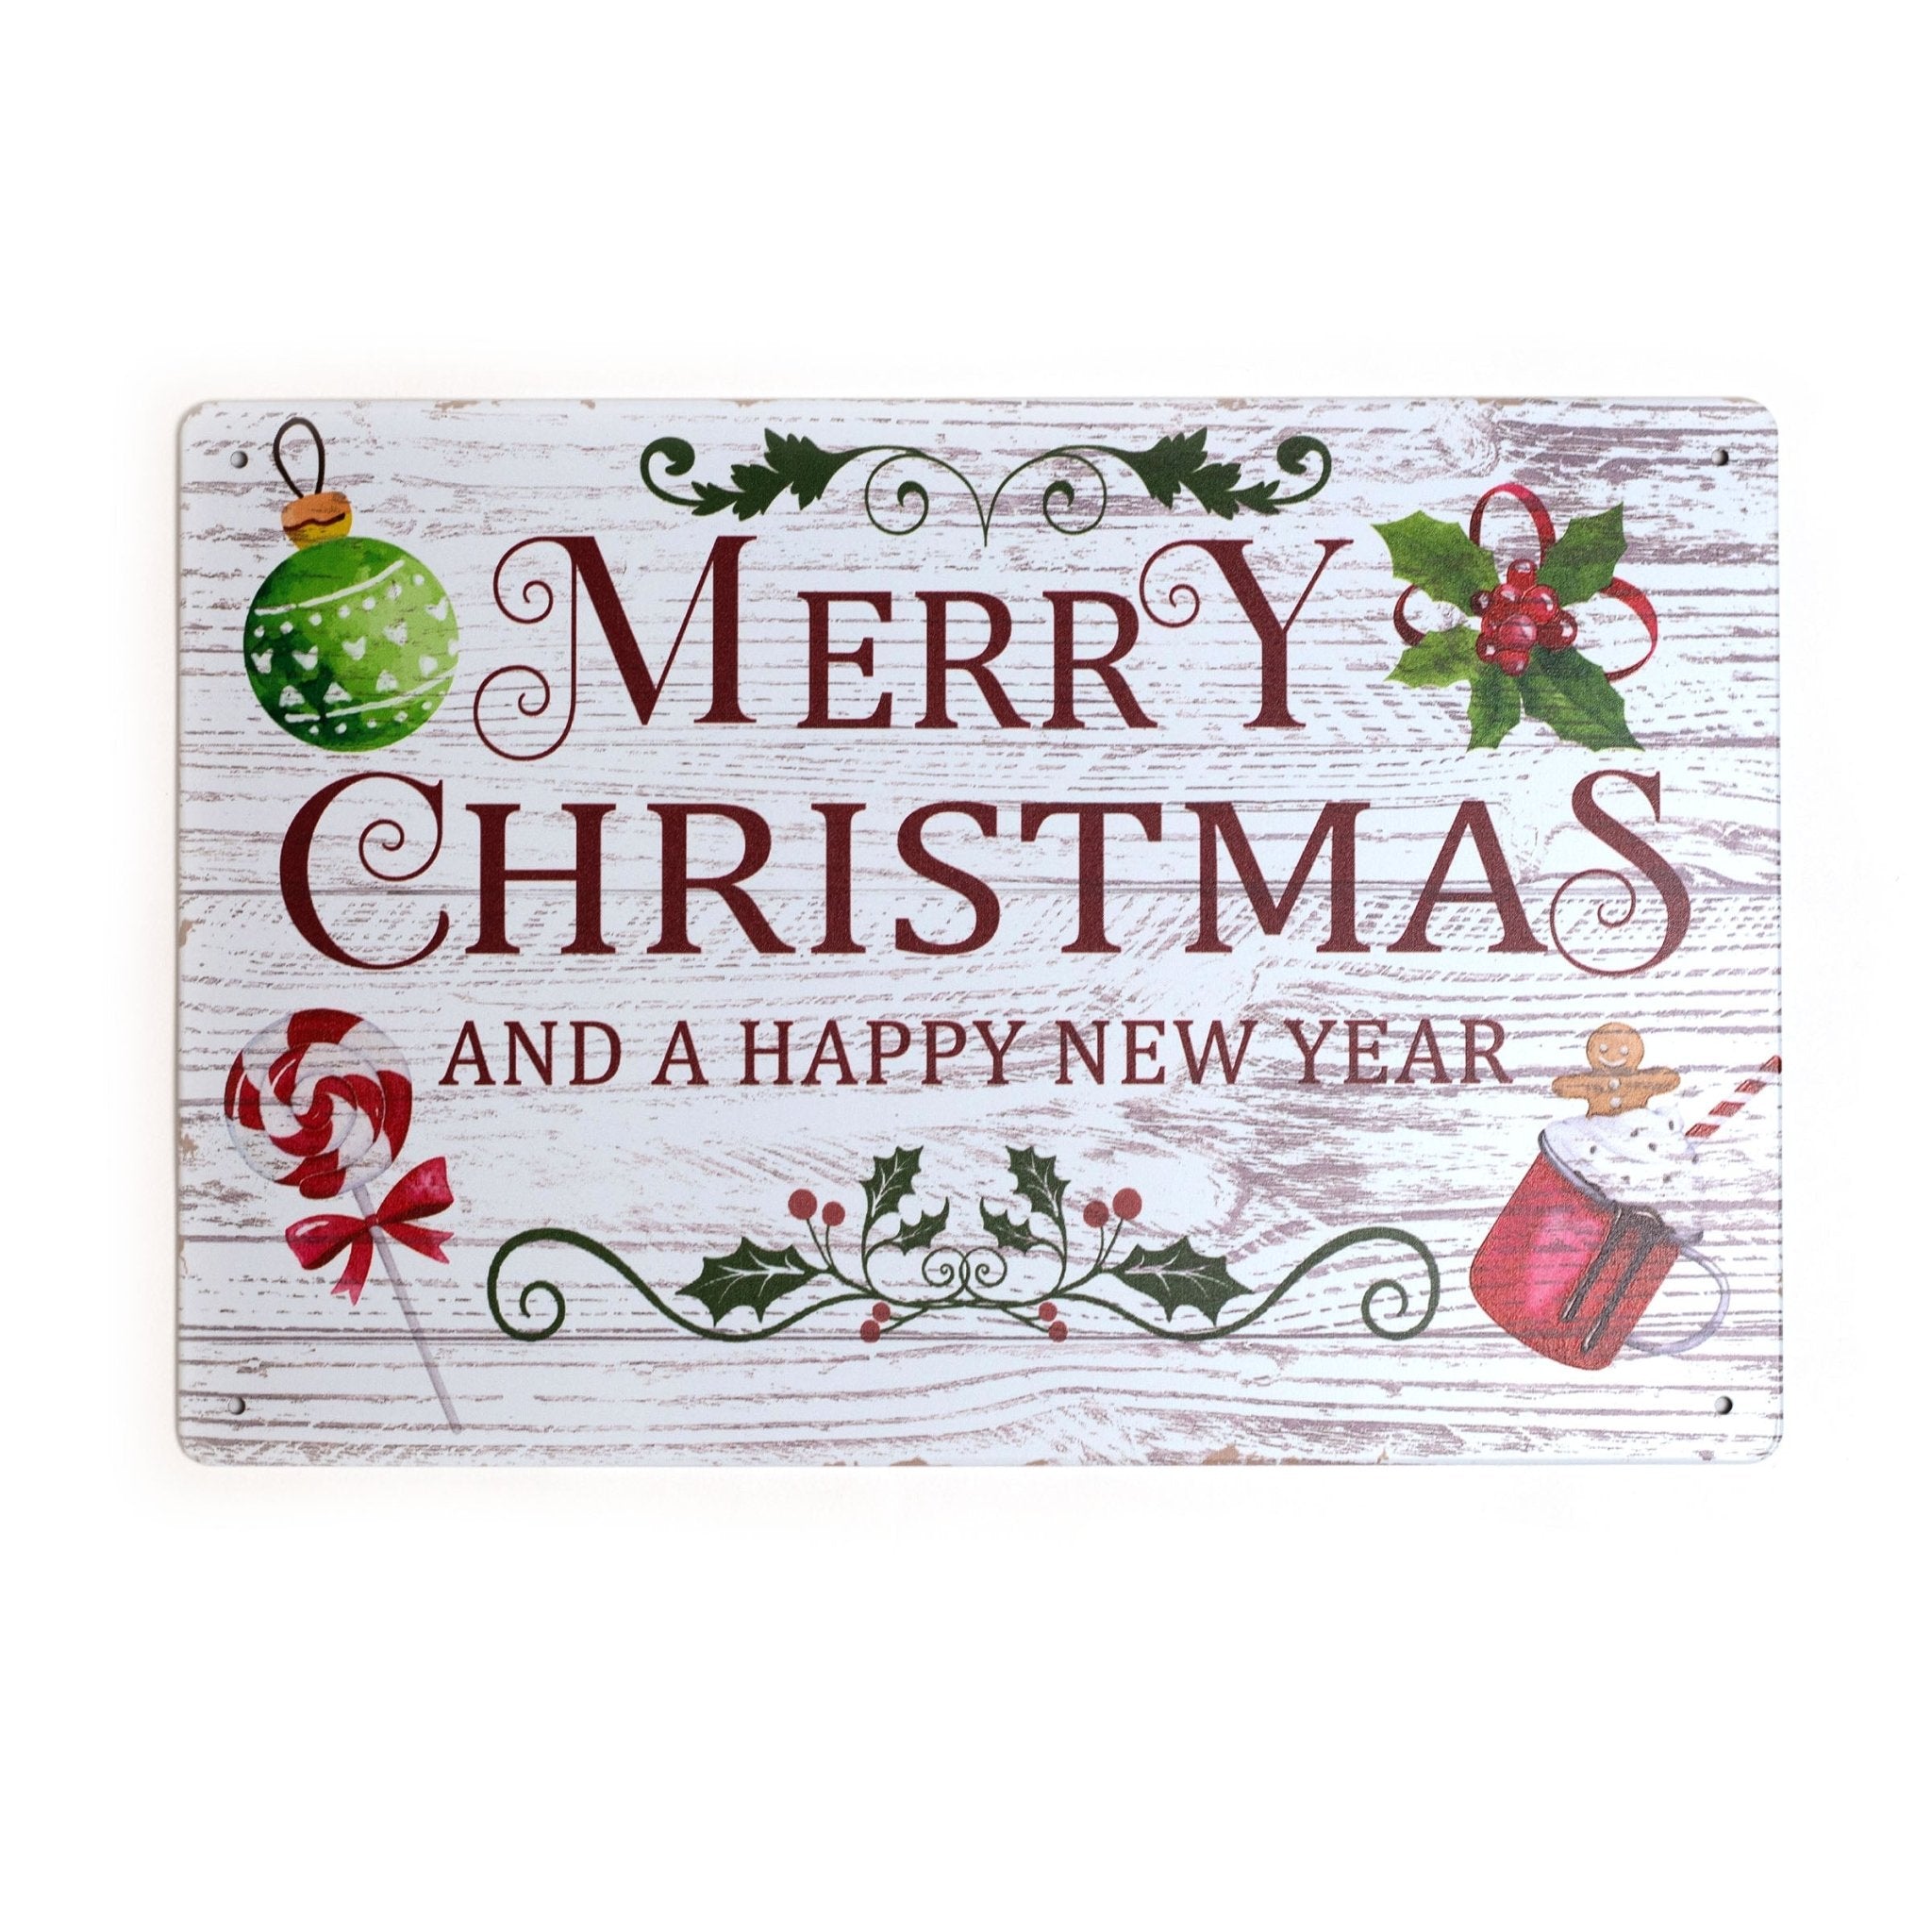 Merry Christmas and Happy New Year Metal Sign 20x30cm 2030002 - MODA FLORA Santa's Workshop